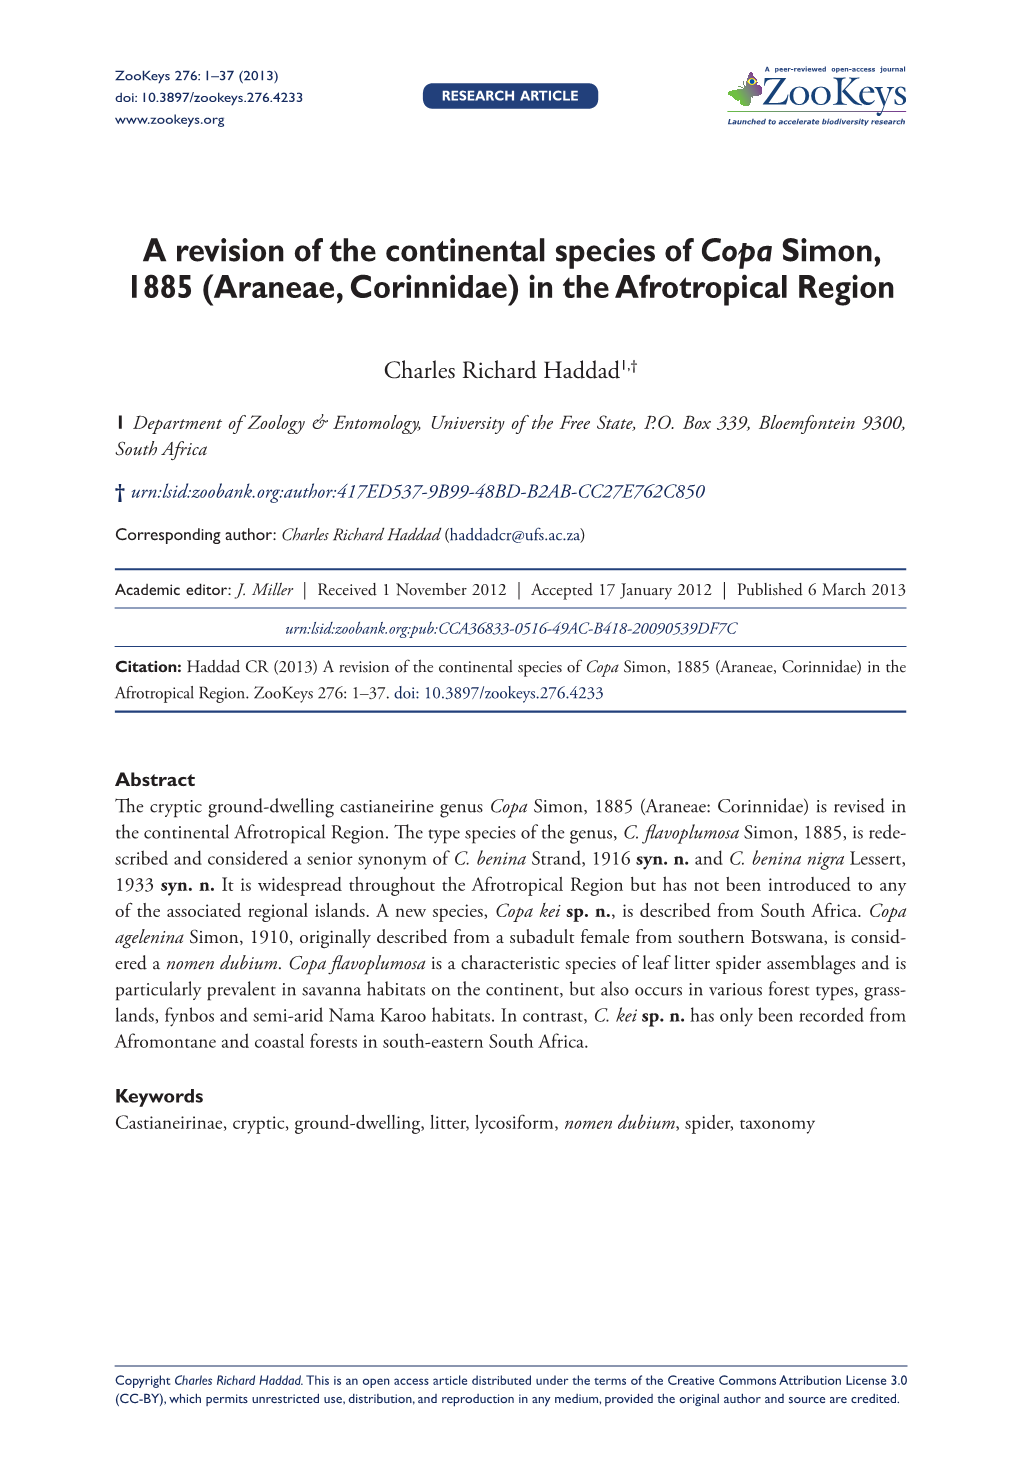 A Revision of the Continental Species of Copa Simon, 1885 (Araneae, Corinnidae) in the Afrotropical Region